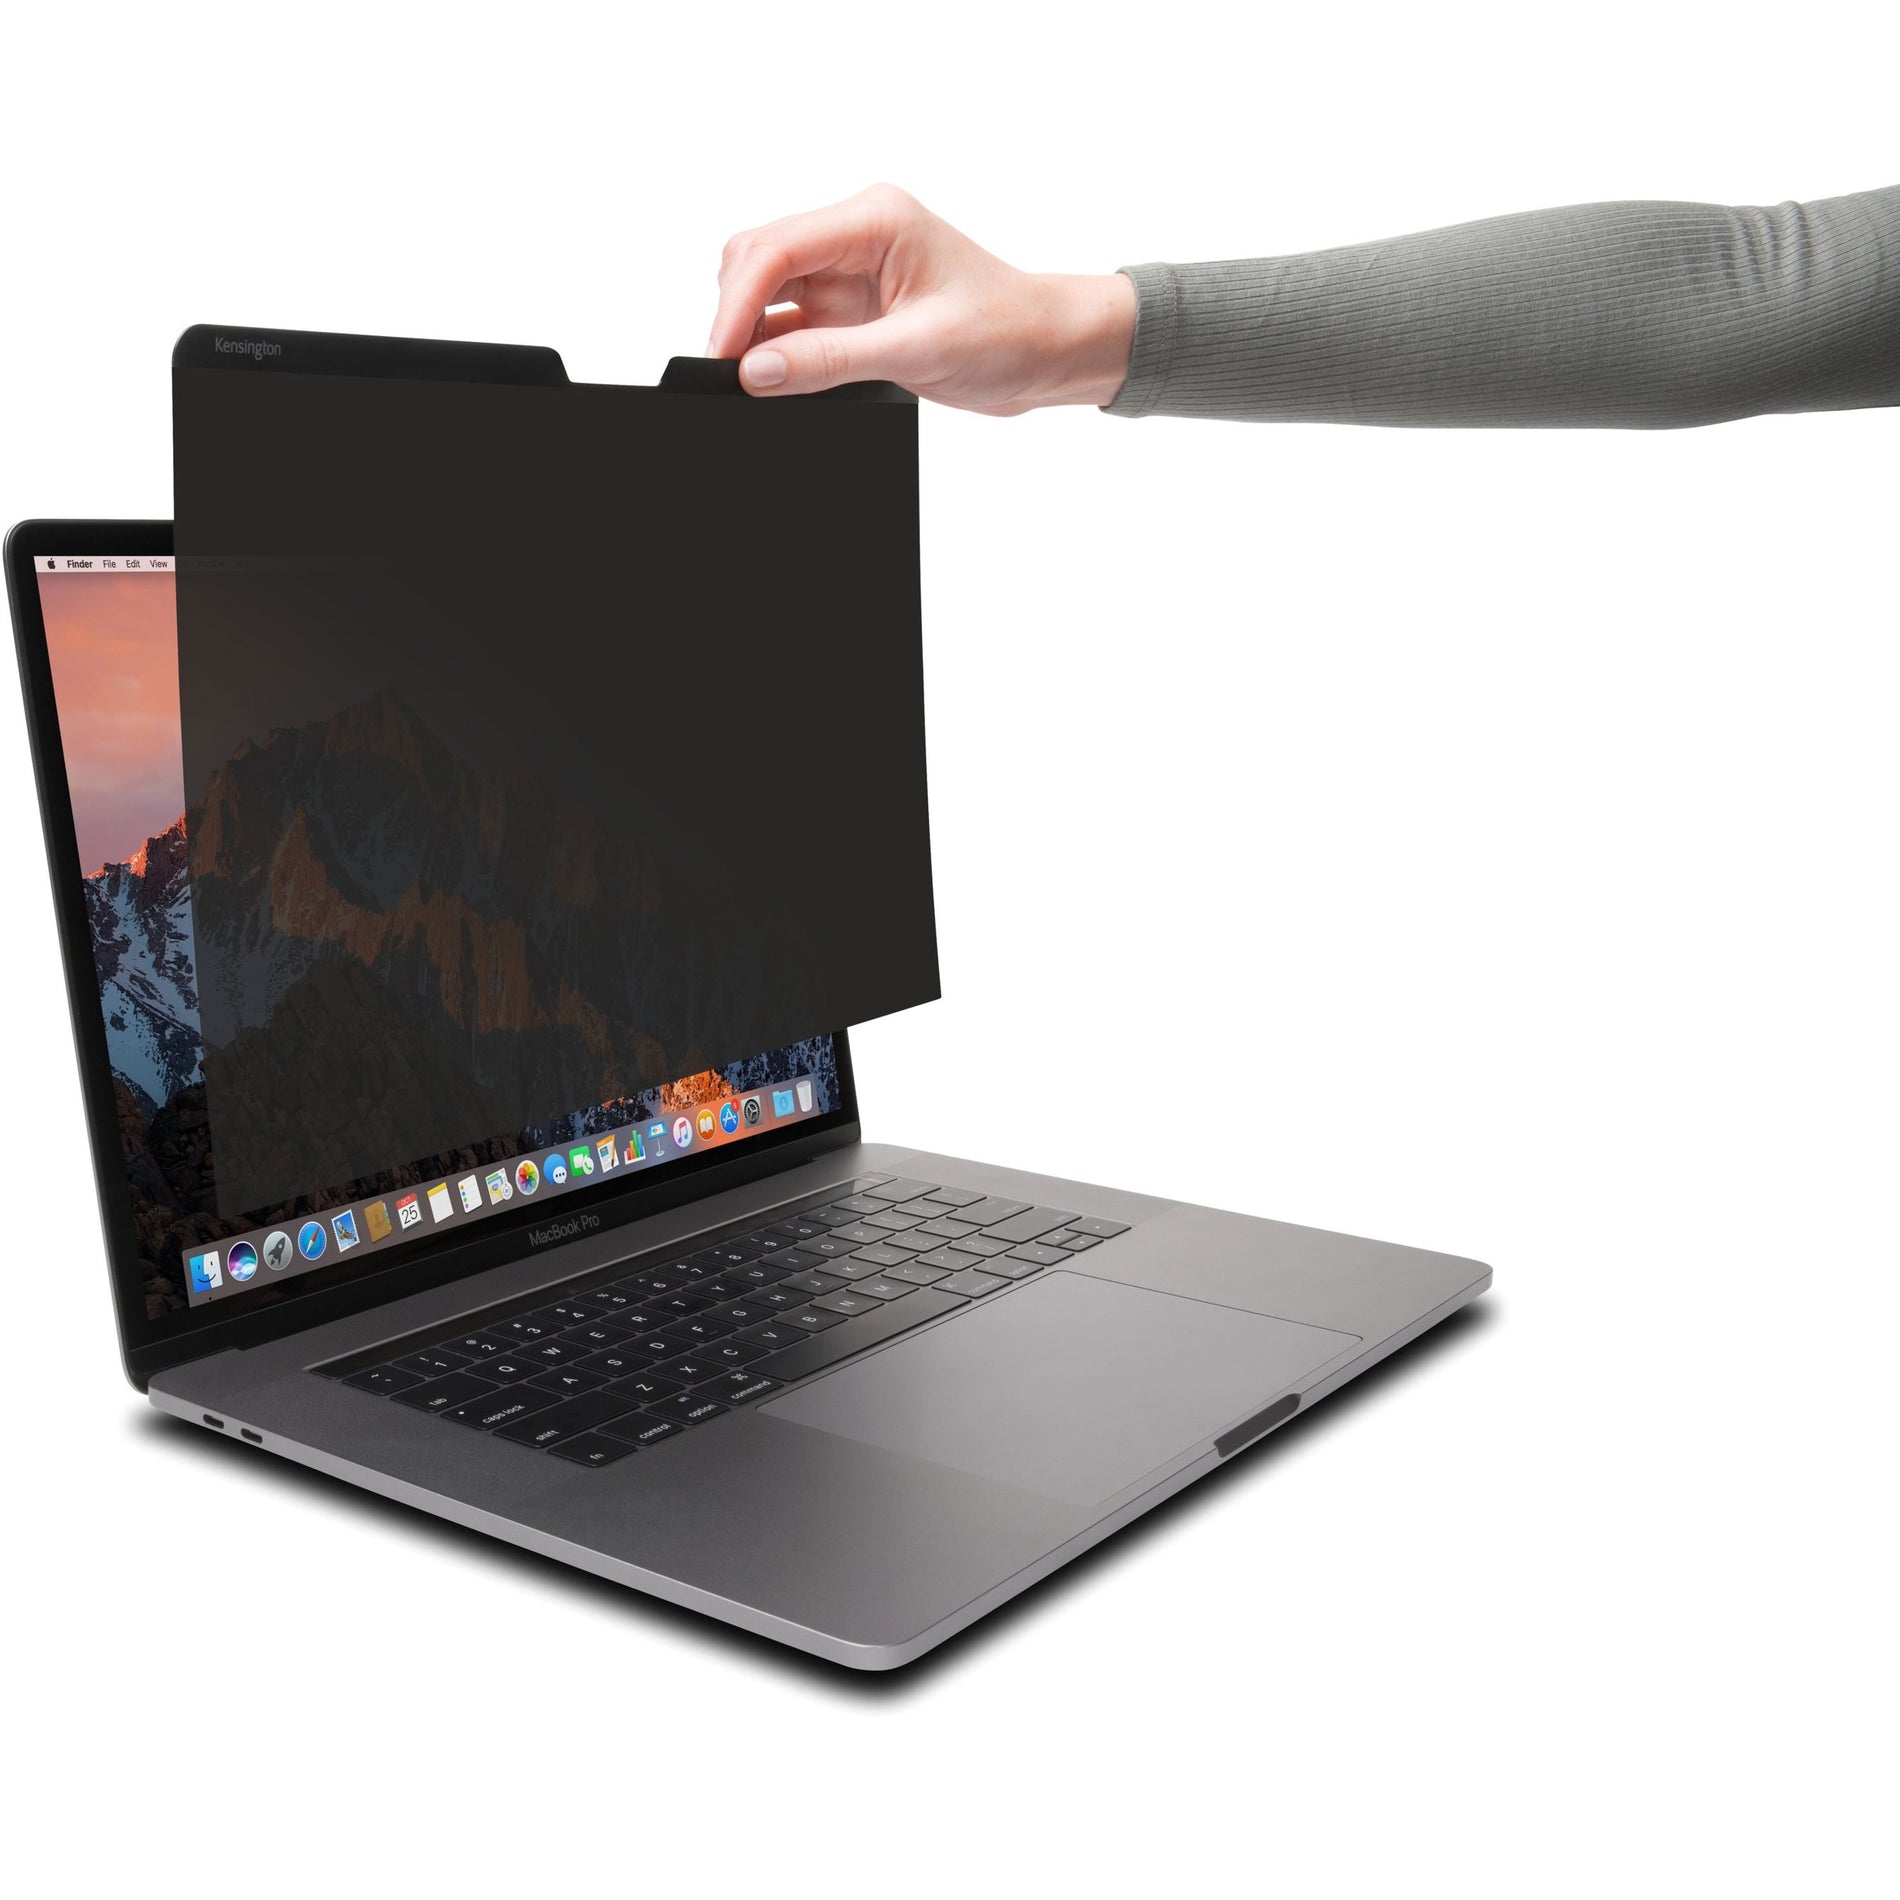 Kensington K58360WW MagPro Elite Magnetic Privacy Screen for MacBook Pro, Protect Your Privacy and Reduce Eye Strain